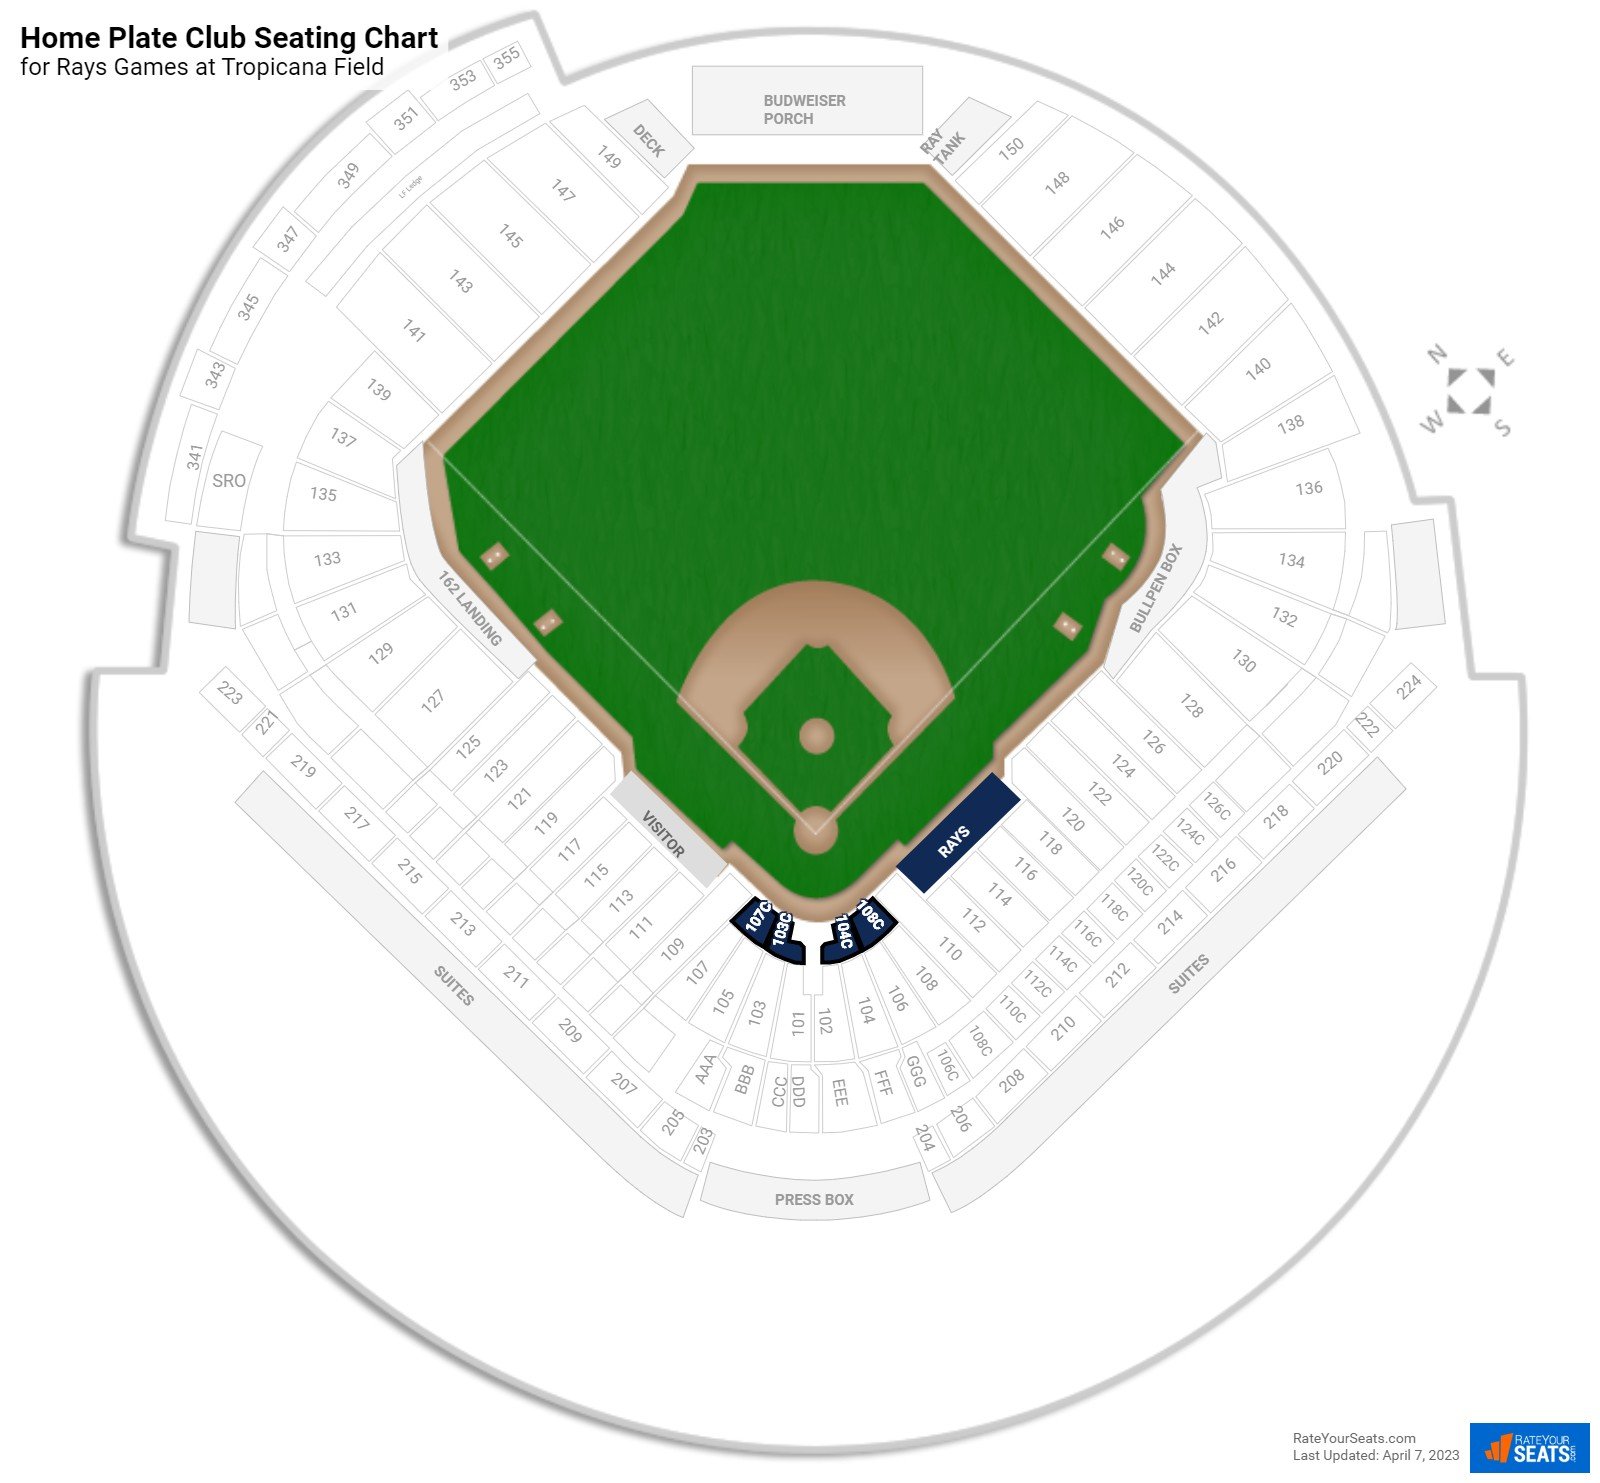 Rays Home Plate Club Seating Chart at Tropicana Field